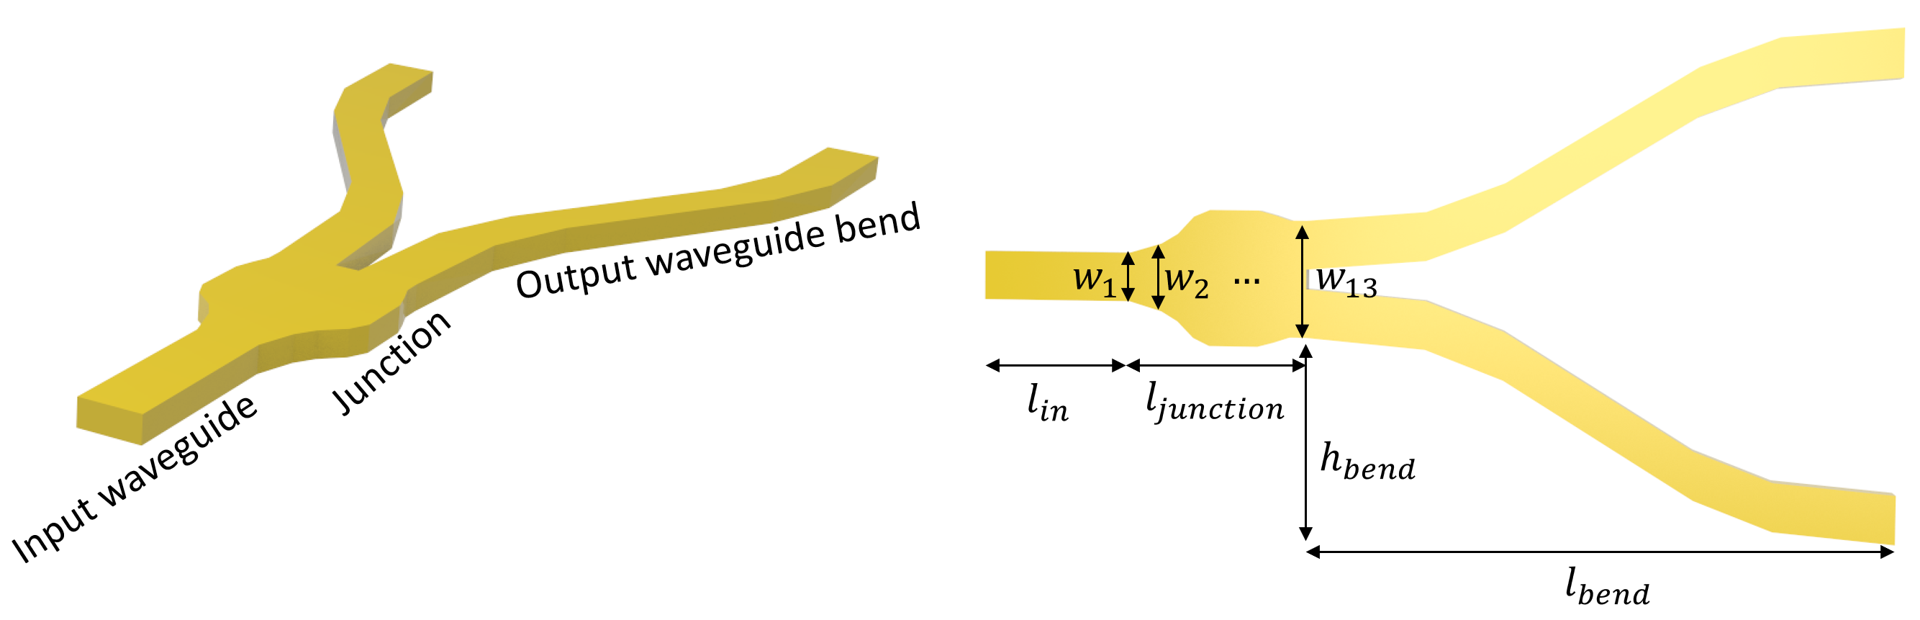 Schematic of the waveguide Y junction